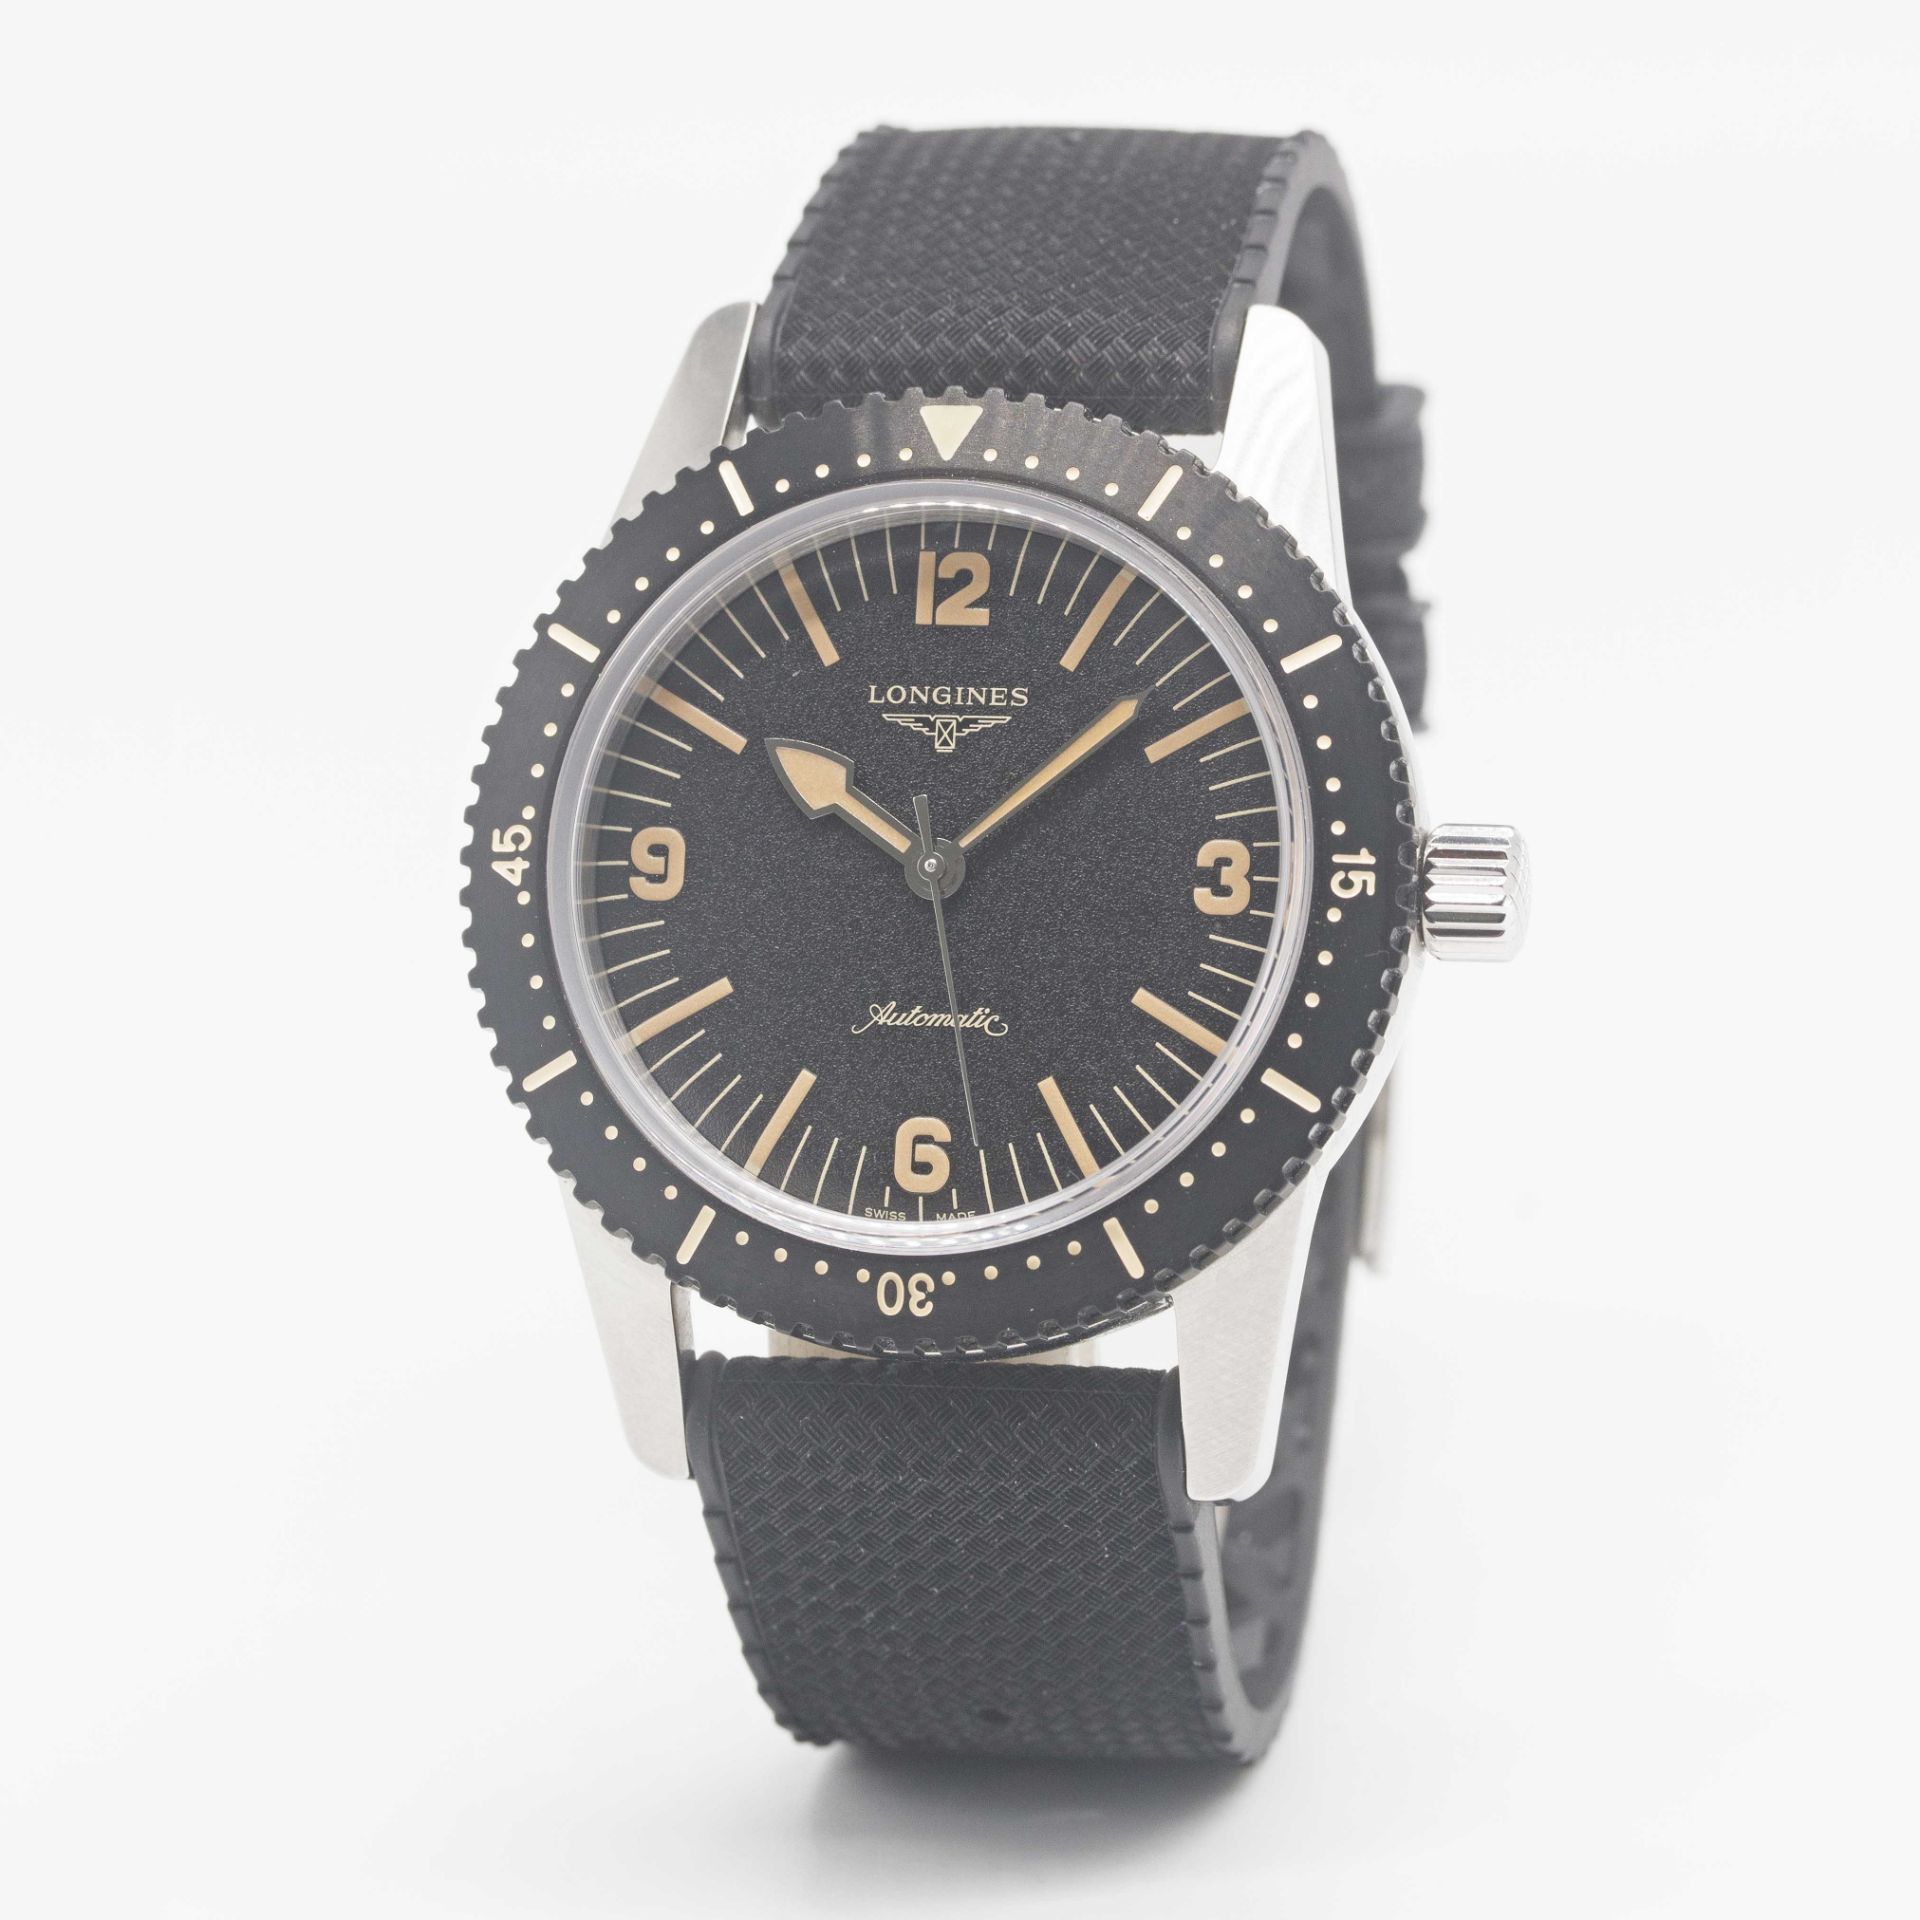 A GENTLEMAN'S STAINLESS STEEL LONGINES HERITAGE SKIN DIVER WRIST WATCH DATED 2020, REF. L28224569 - Image 3 of 9